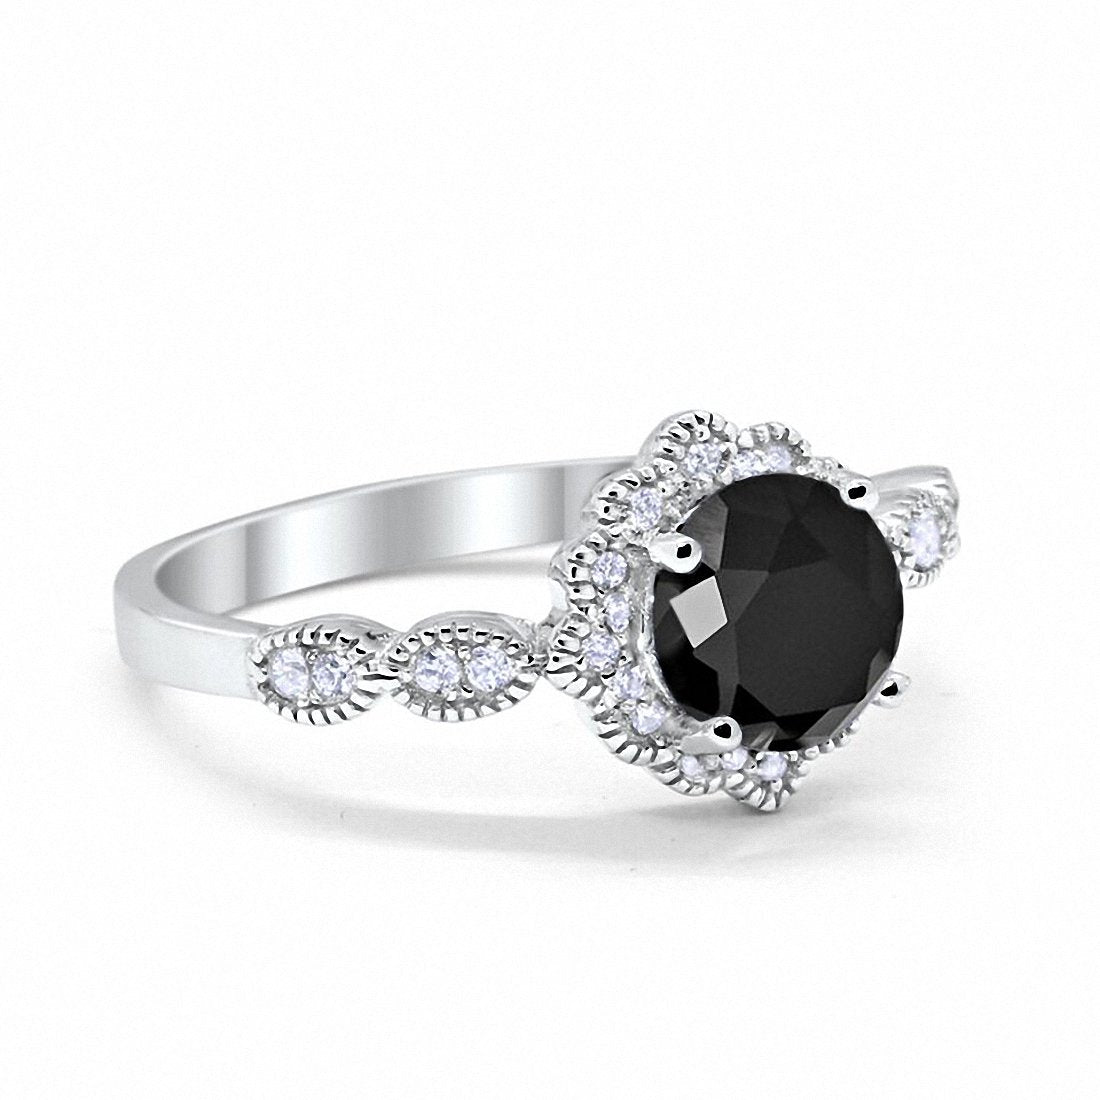 Floral Art Wedding Ring Simulated Black Cubic Zirconia 925 Sterling Silver